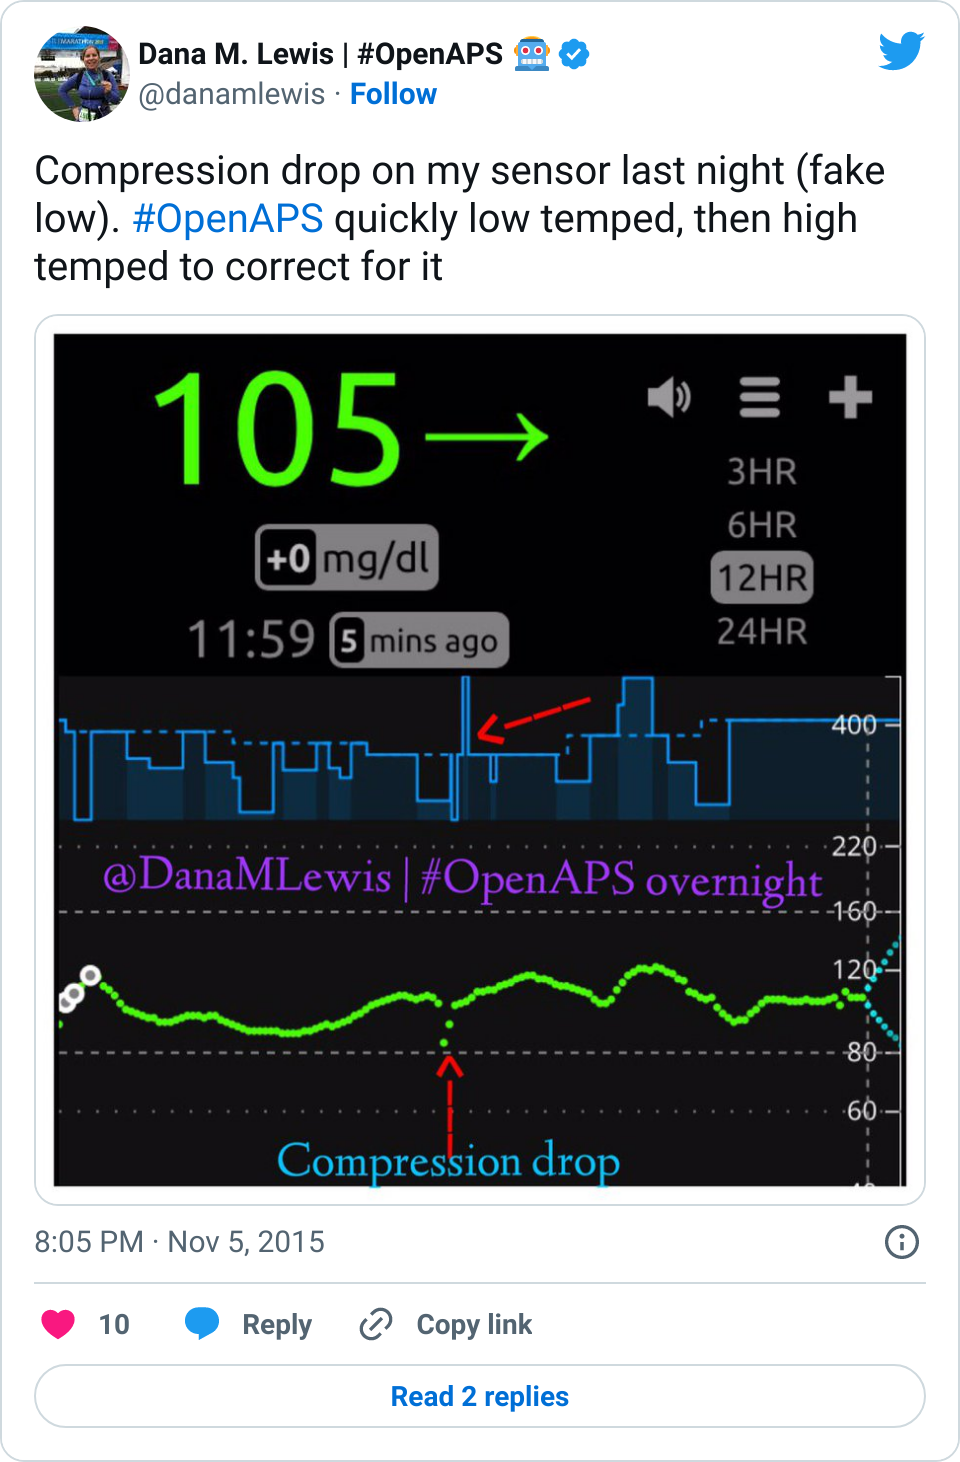 Showing a fake drop in CGM glucose data that is a compression drop